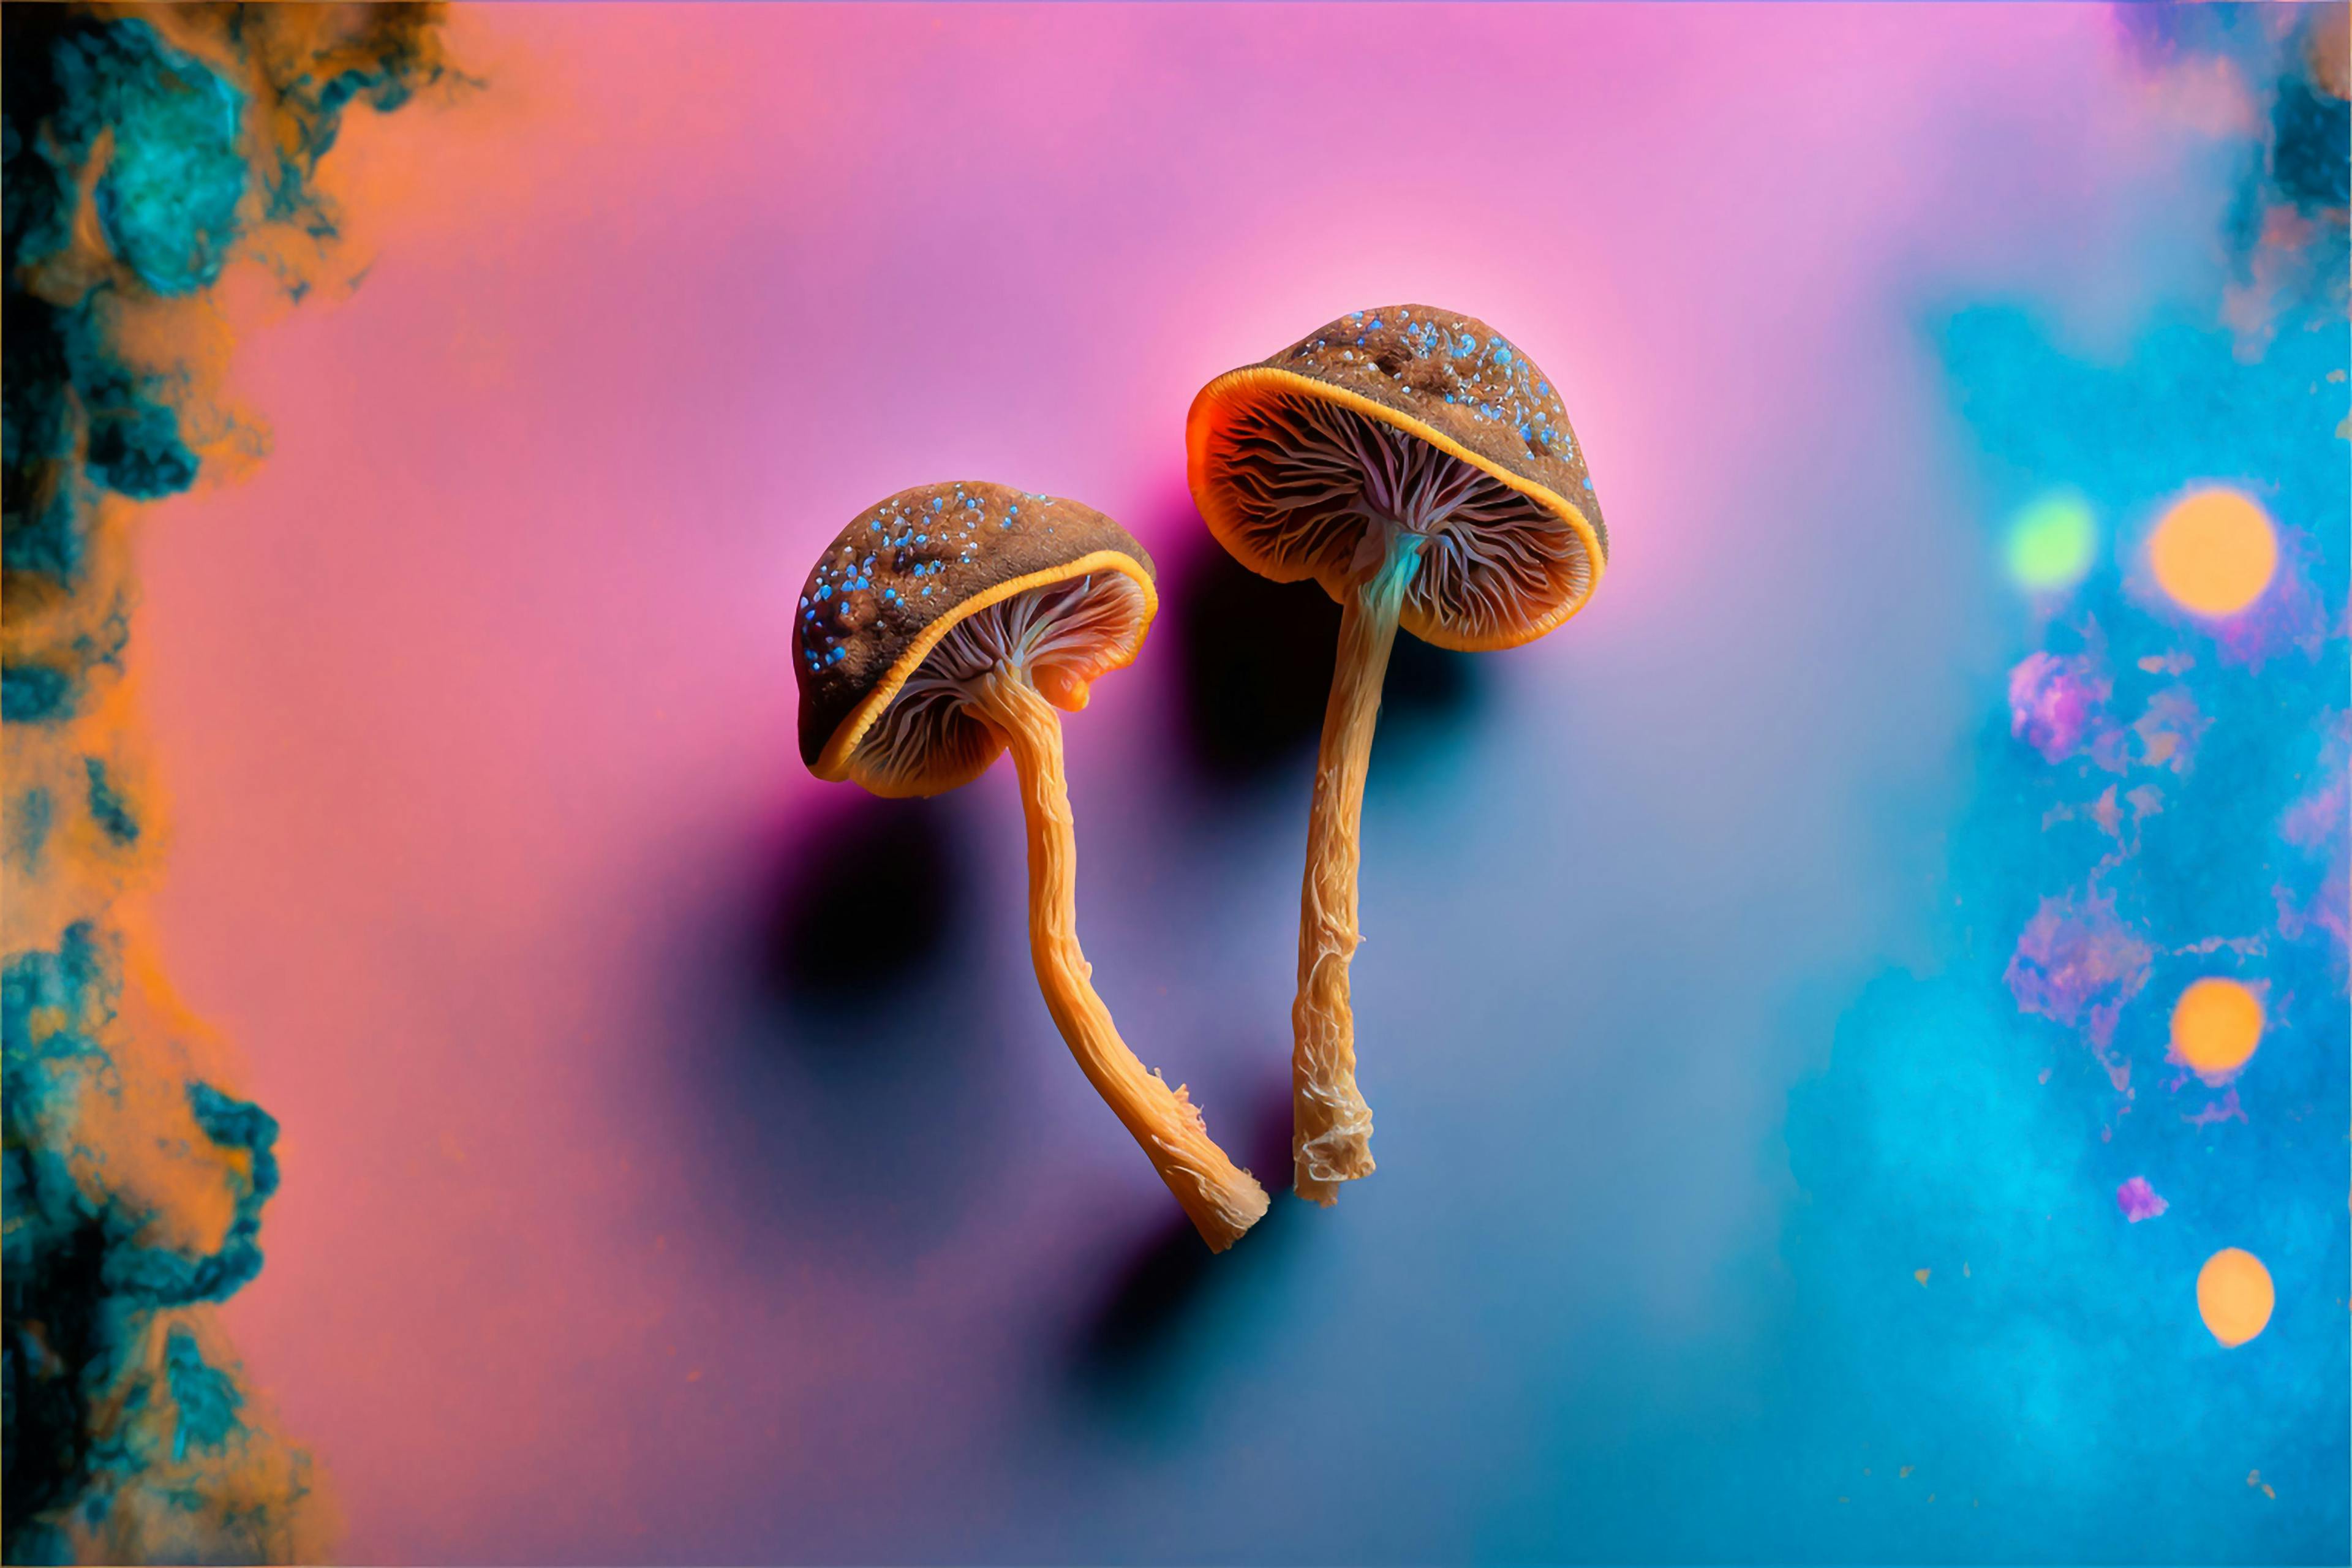 Therapeutic Relationship Plays Key Role in Psychedelic Treatment